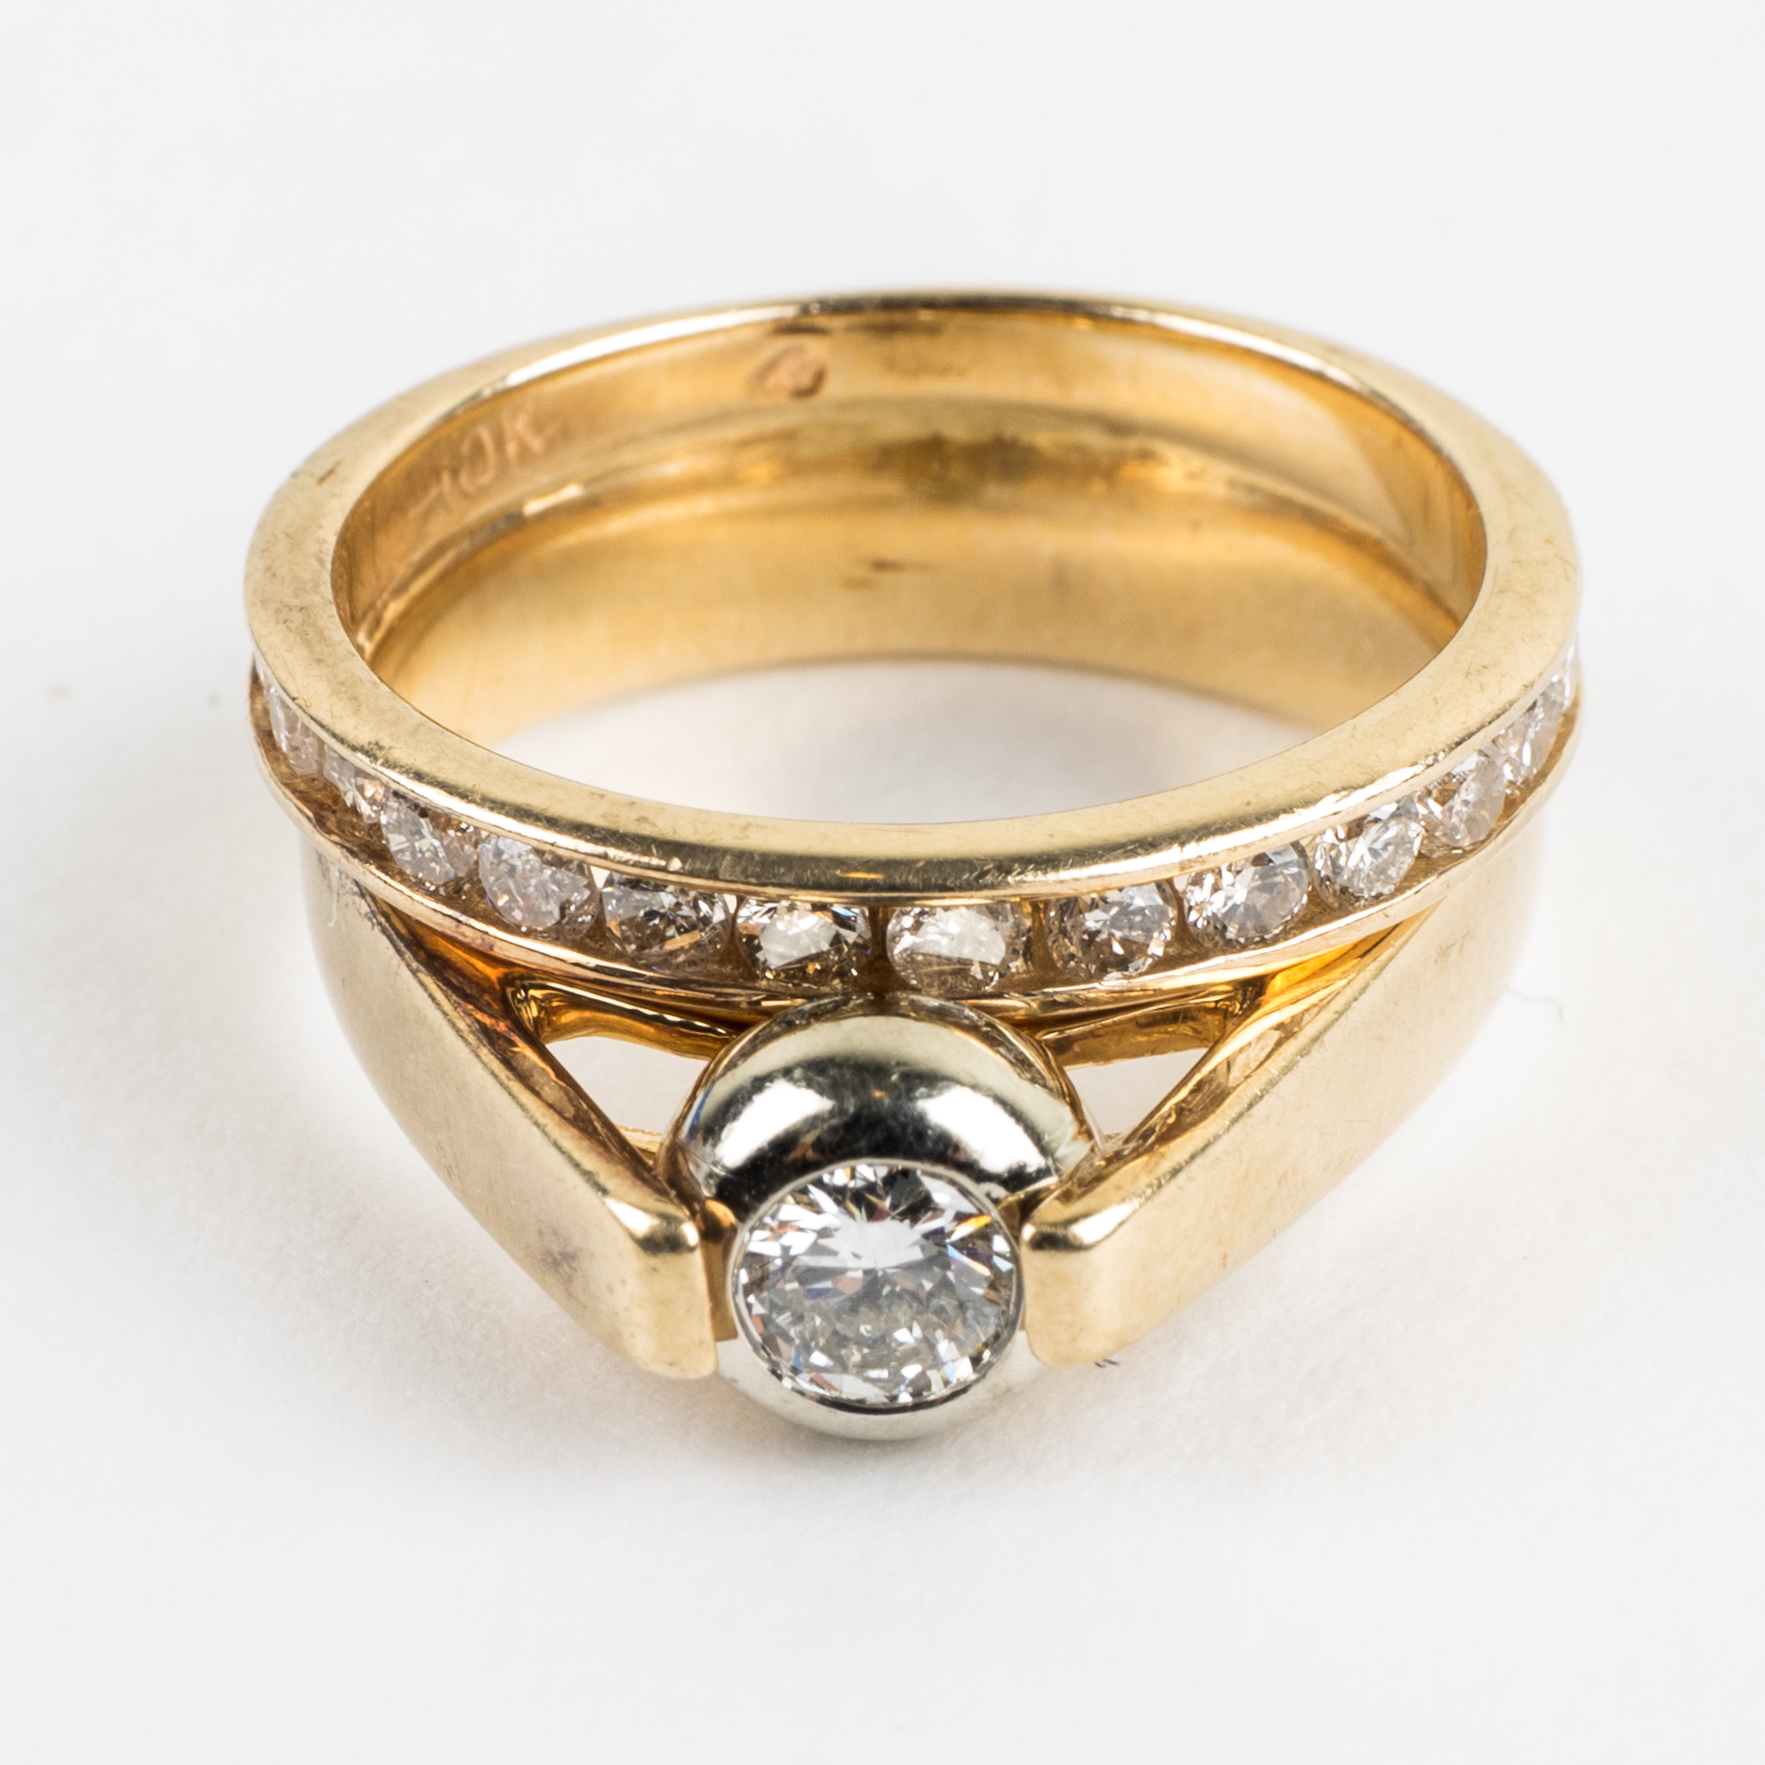 Salvation Army Launches Online Auction For Jewelry Donated In 